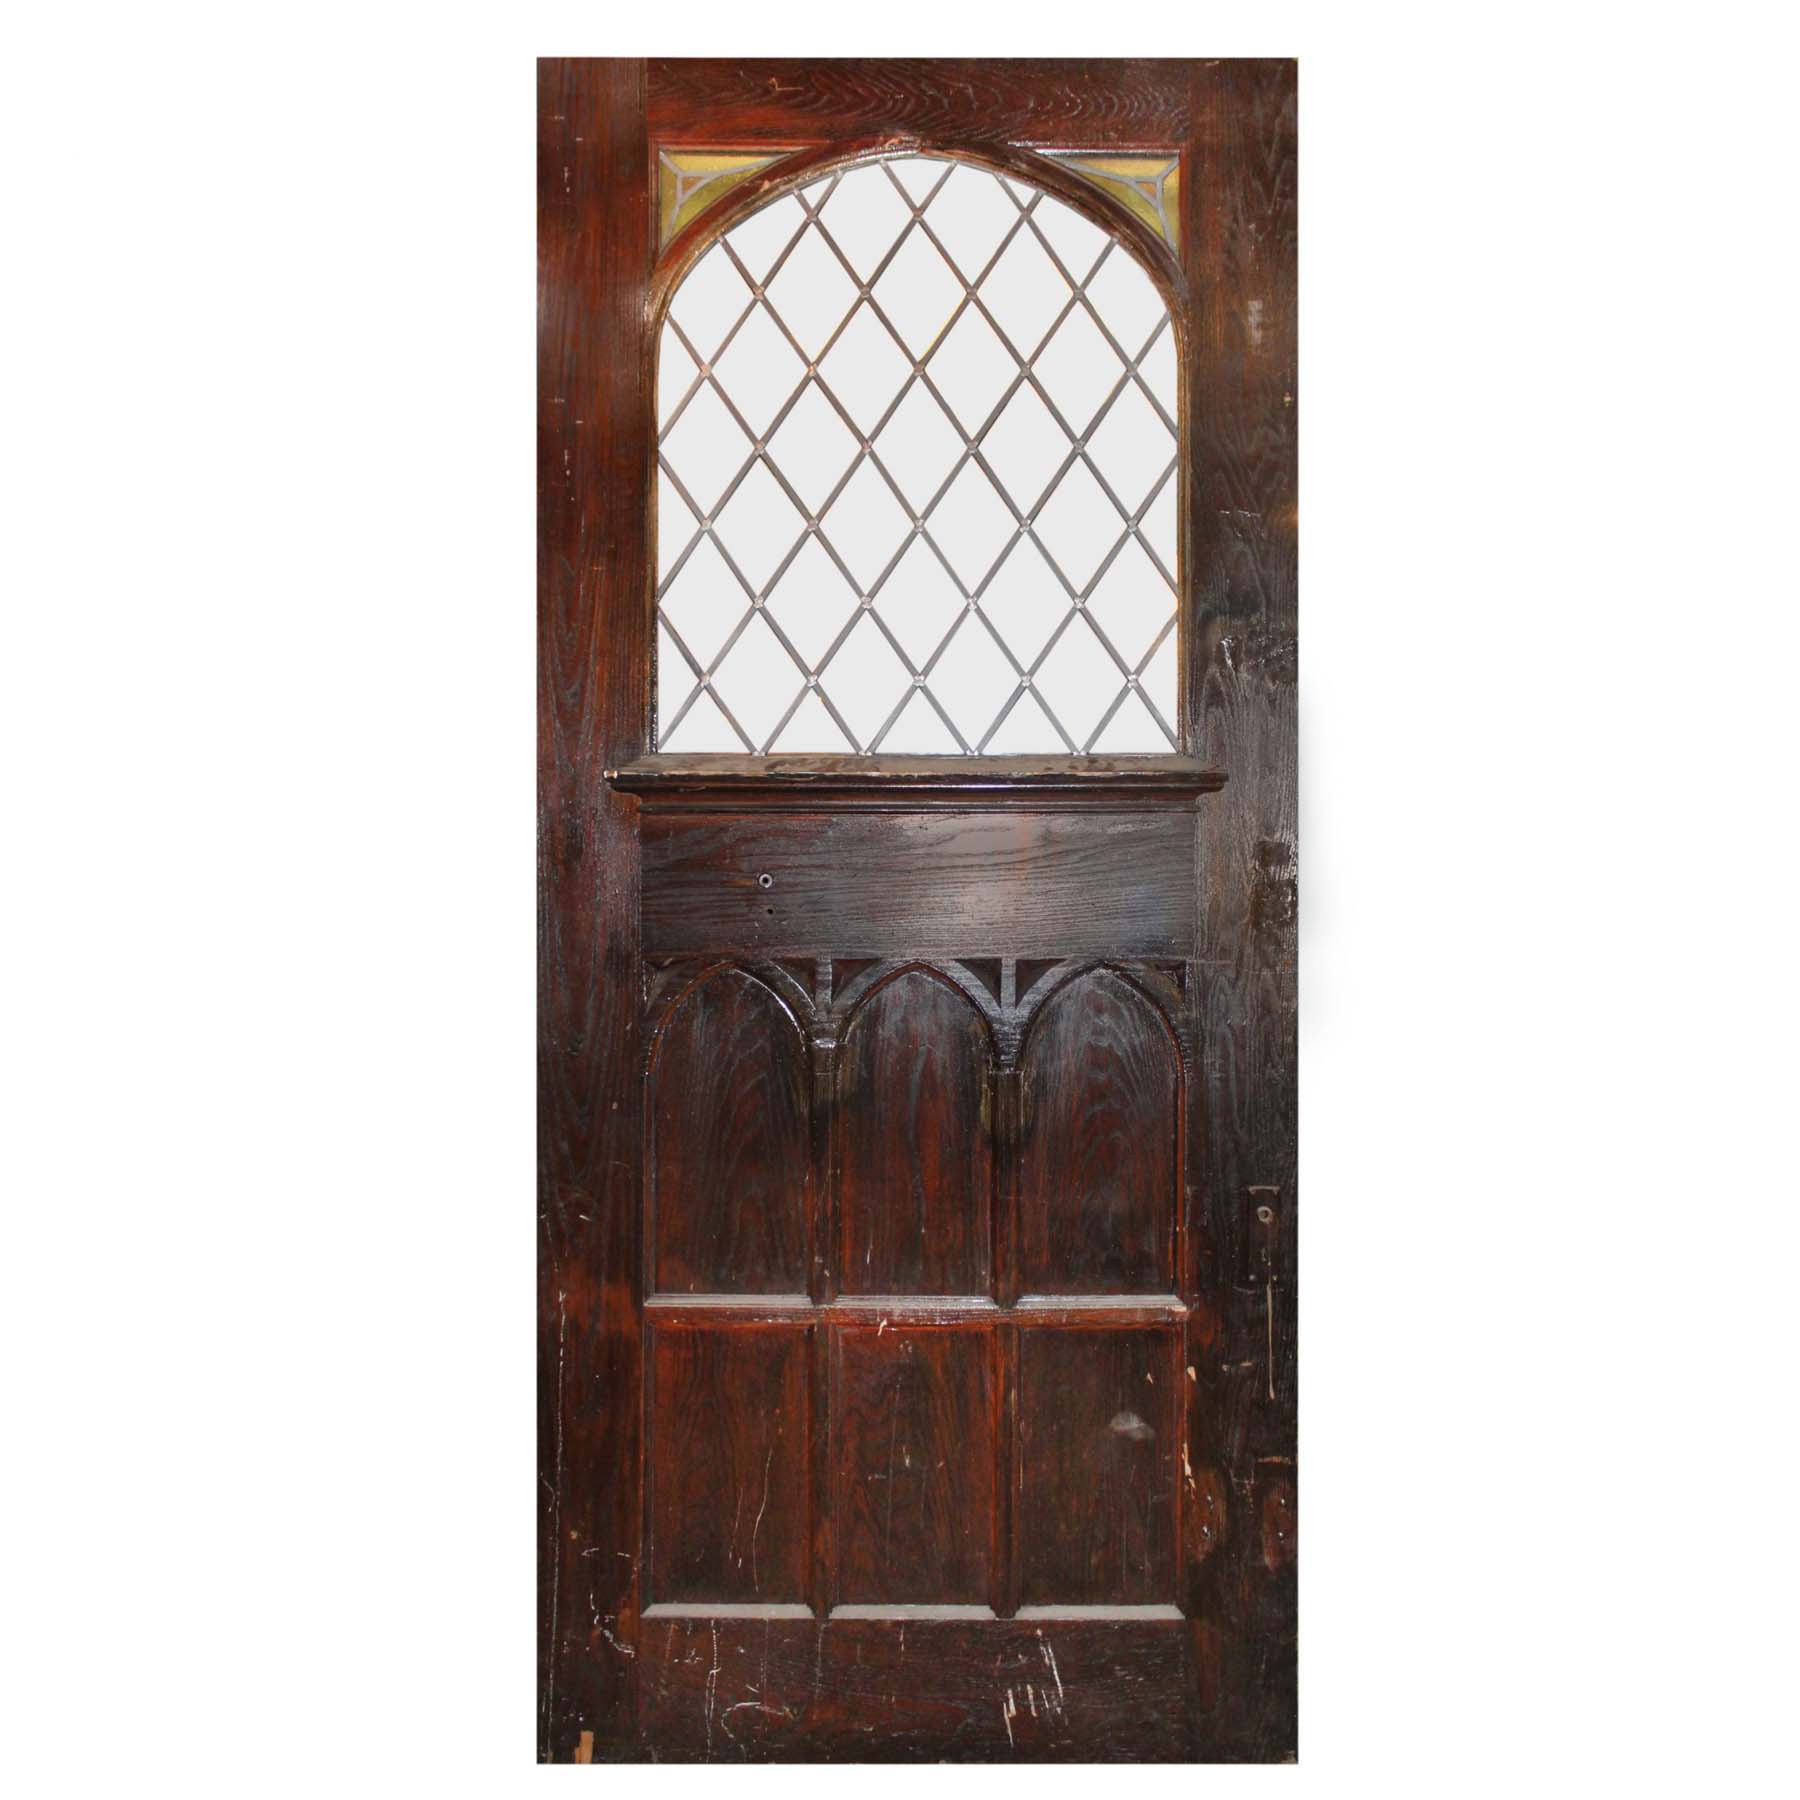 Substantial 47” Salvaged Oak Door with Gothic Arch Window-0